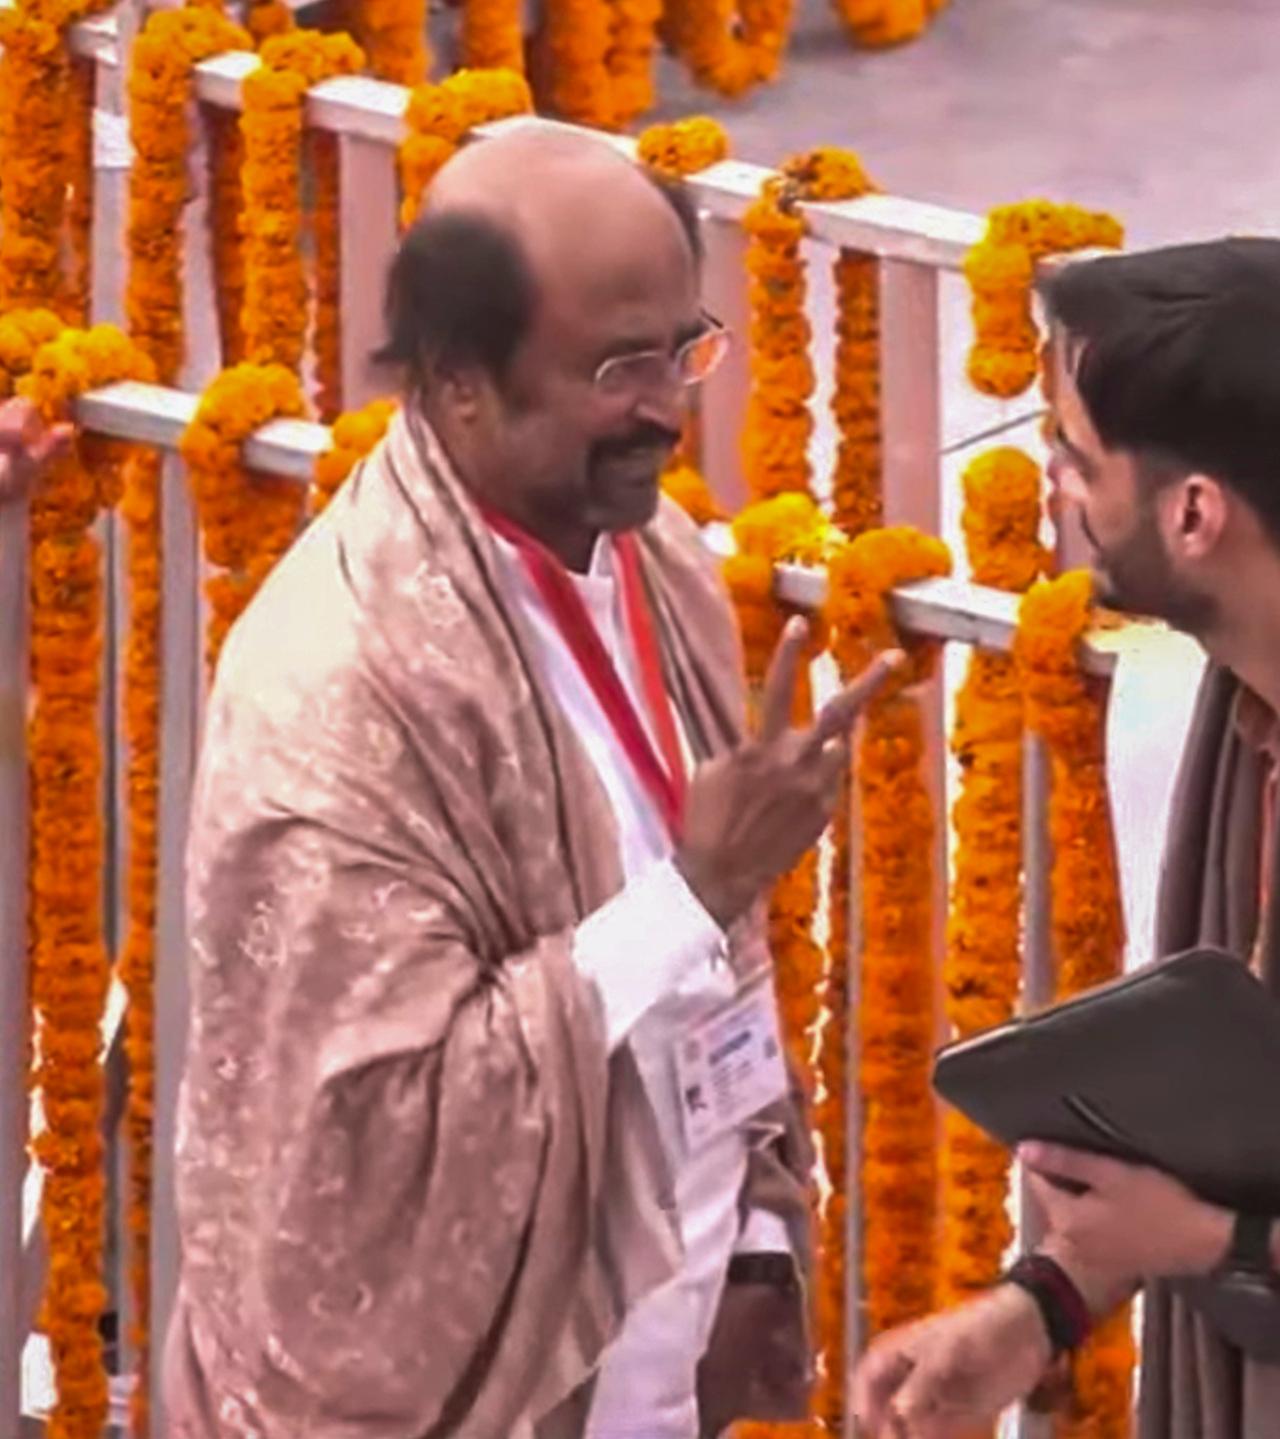 Megastar Rajinikanth was seen happily greeting everyone as he made his way to the temple for the grand ceremony. The actor who arrived on Sunday had also met Anupam Kher in Ayodhya